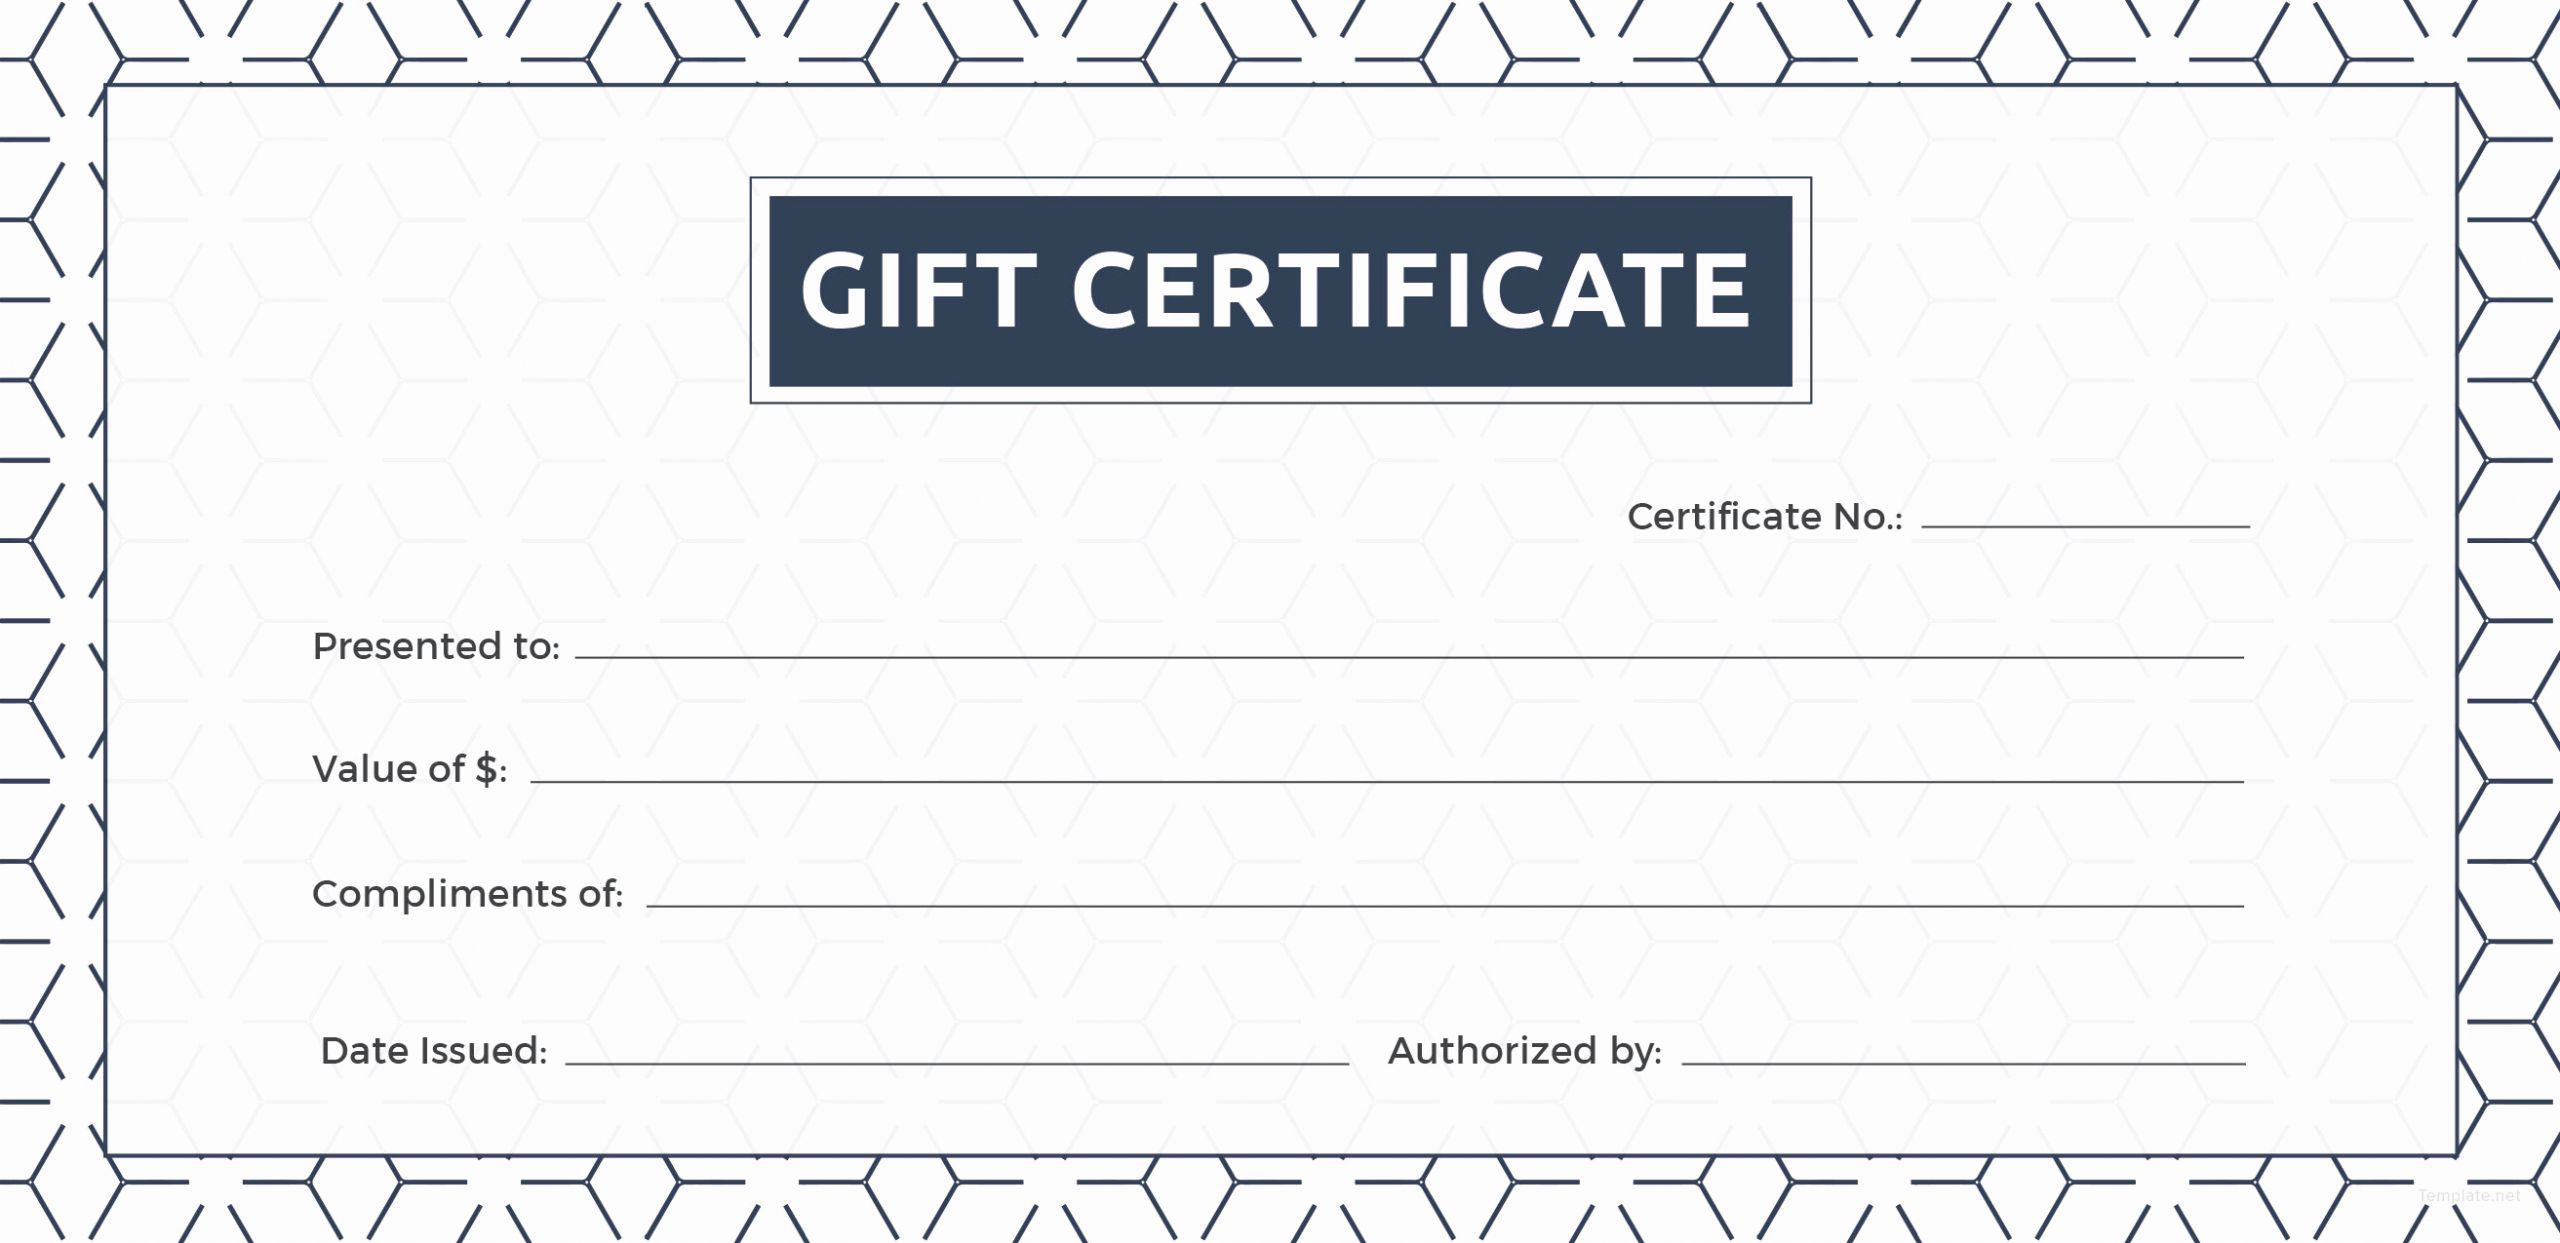 Photo Gift Certificate Template Best Of Gift Achievement Certificate Size A4 Per Piece andaman